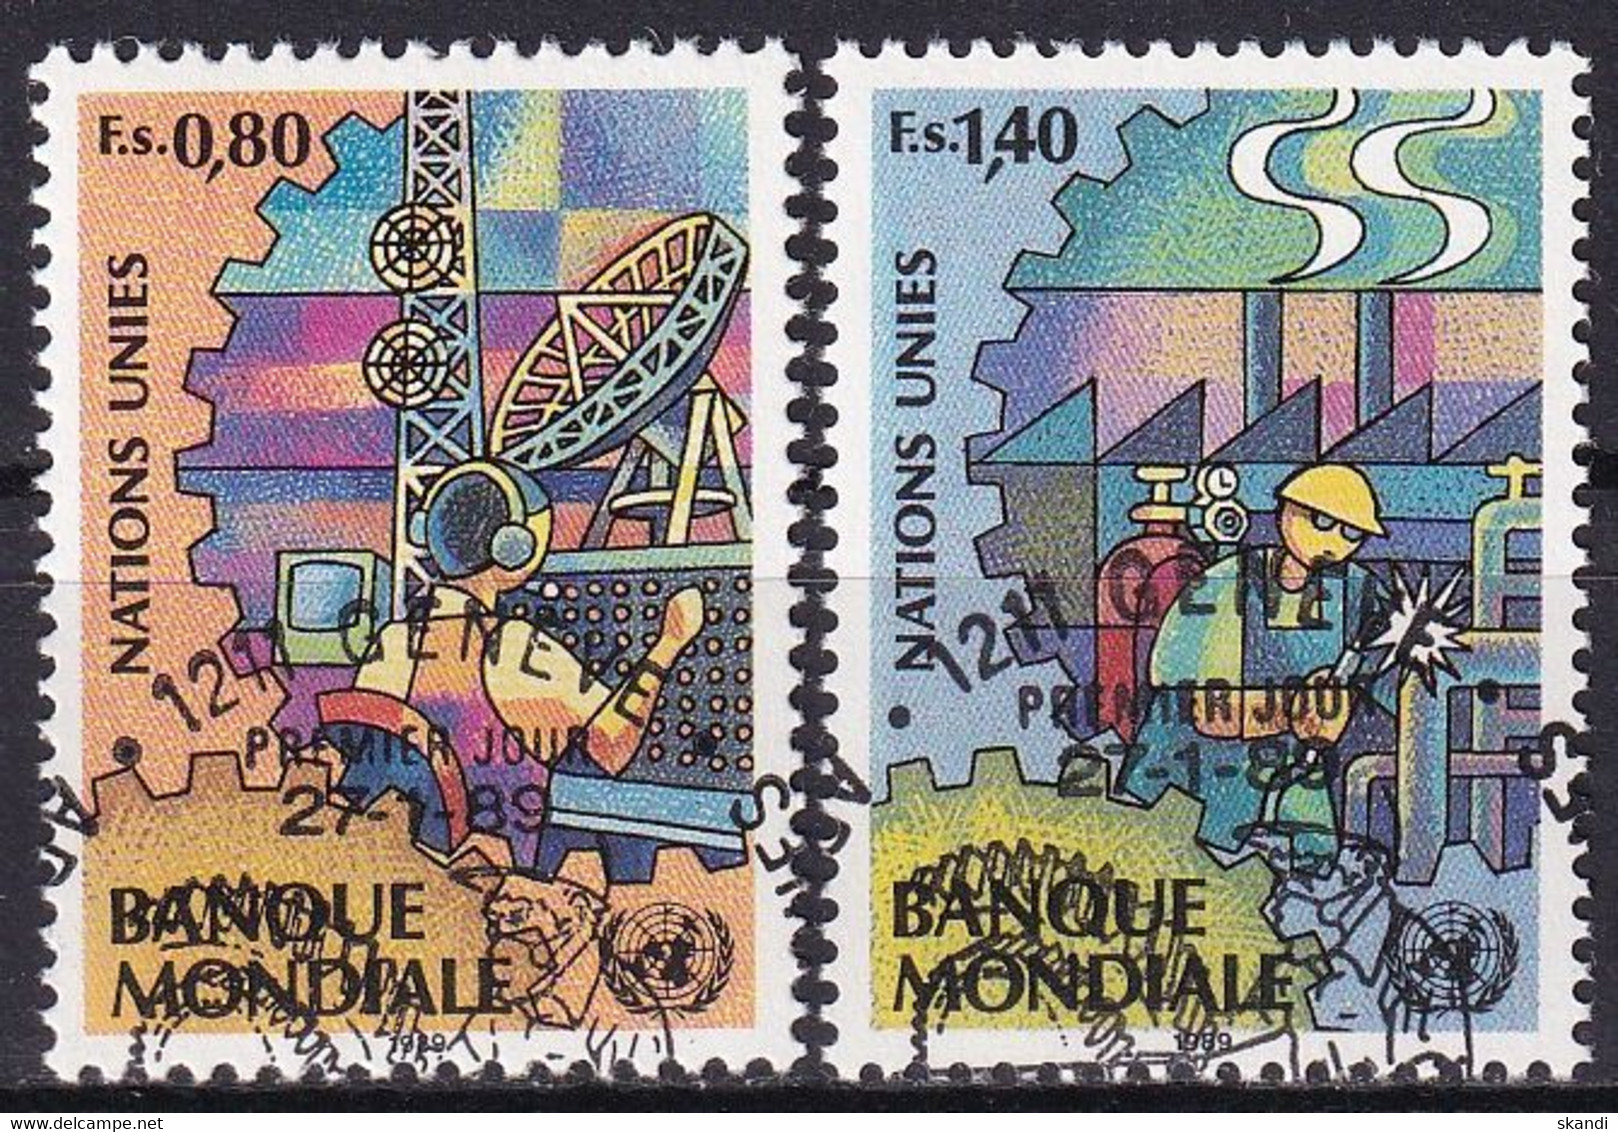 UNO GENF 1989 Mi-Nr. 173/74 O Used - Aus Abo - Used Stamps